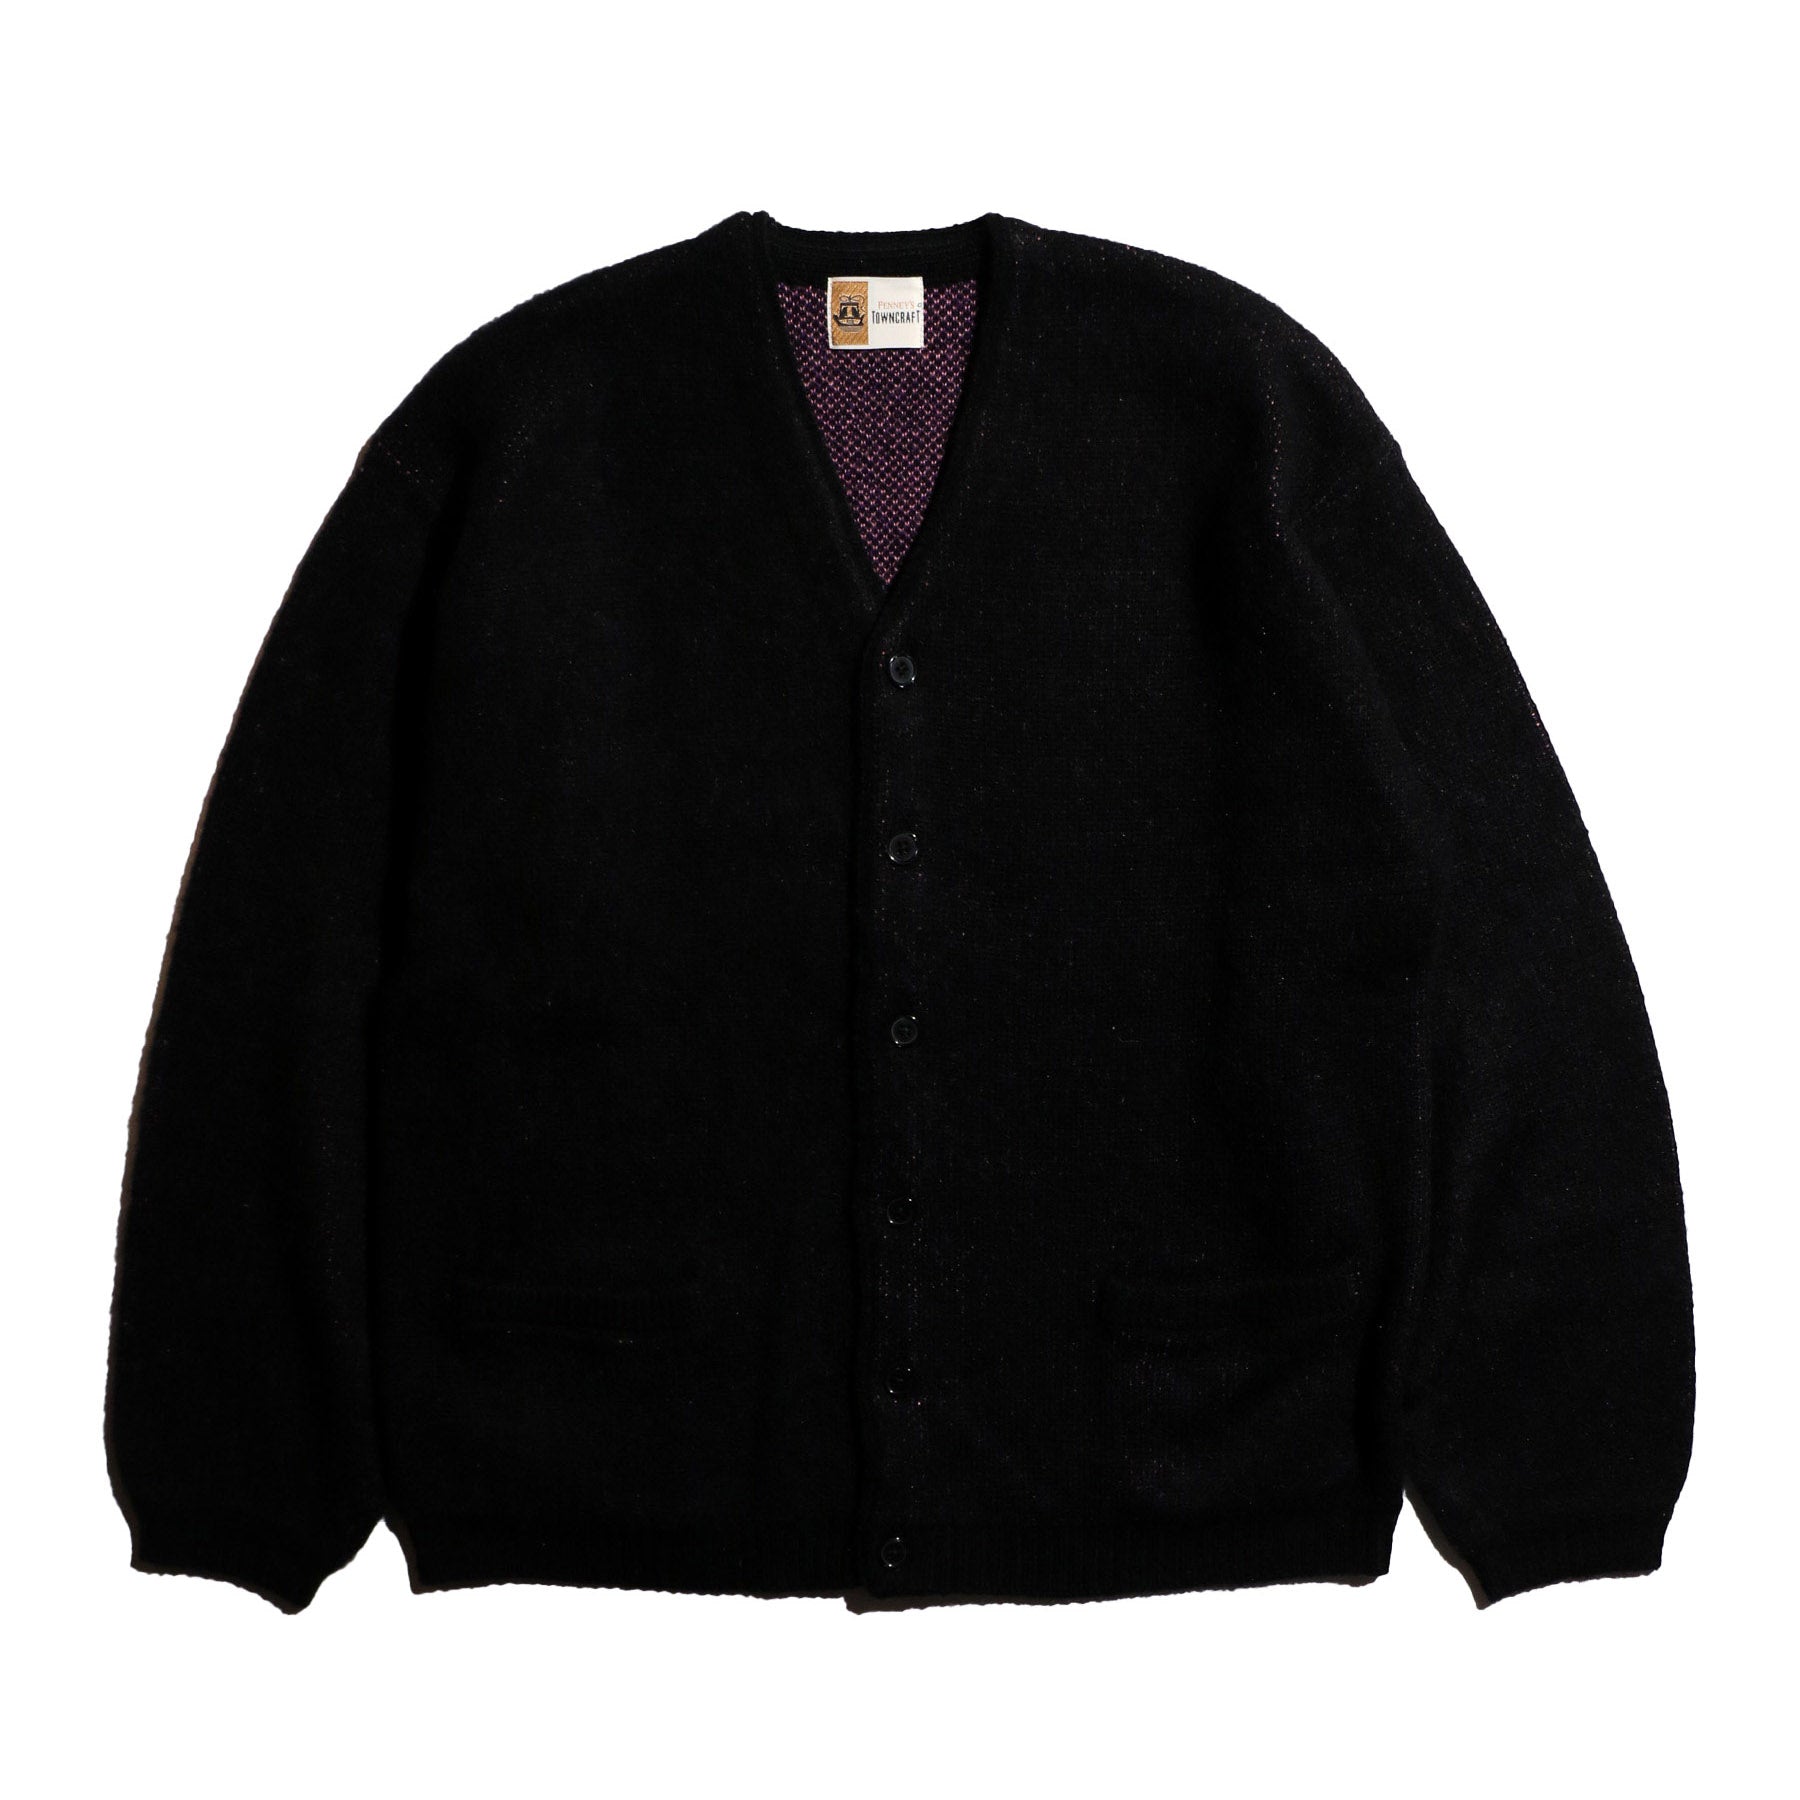 No:tc24f010_BLACK | Name:shaggy color cardigan | Color:Black【TOWNCRAFT_タウンクラフト】【入荷予定アイテム・入荷連絡可能】